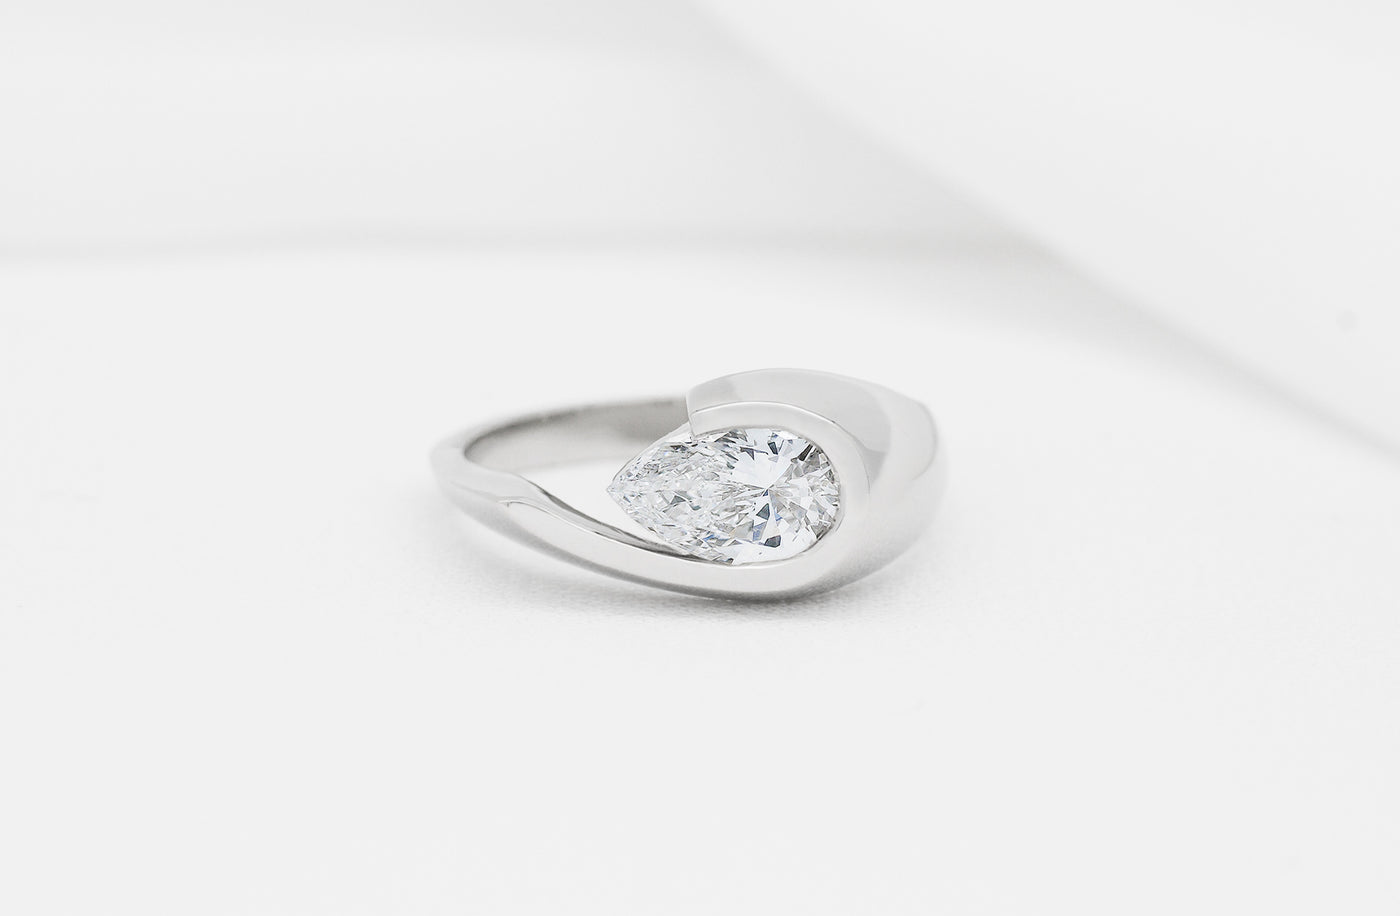 Inspired Collection, Diamond Ring, Jewellery, Jewelry, ring design, specialist, Platinum, 18k, 18ct, white gold, Maori, Polynesian, pear shaped diamond, ready to ship, to go, 1ct, E colour, color, VVS2 clarity